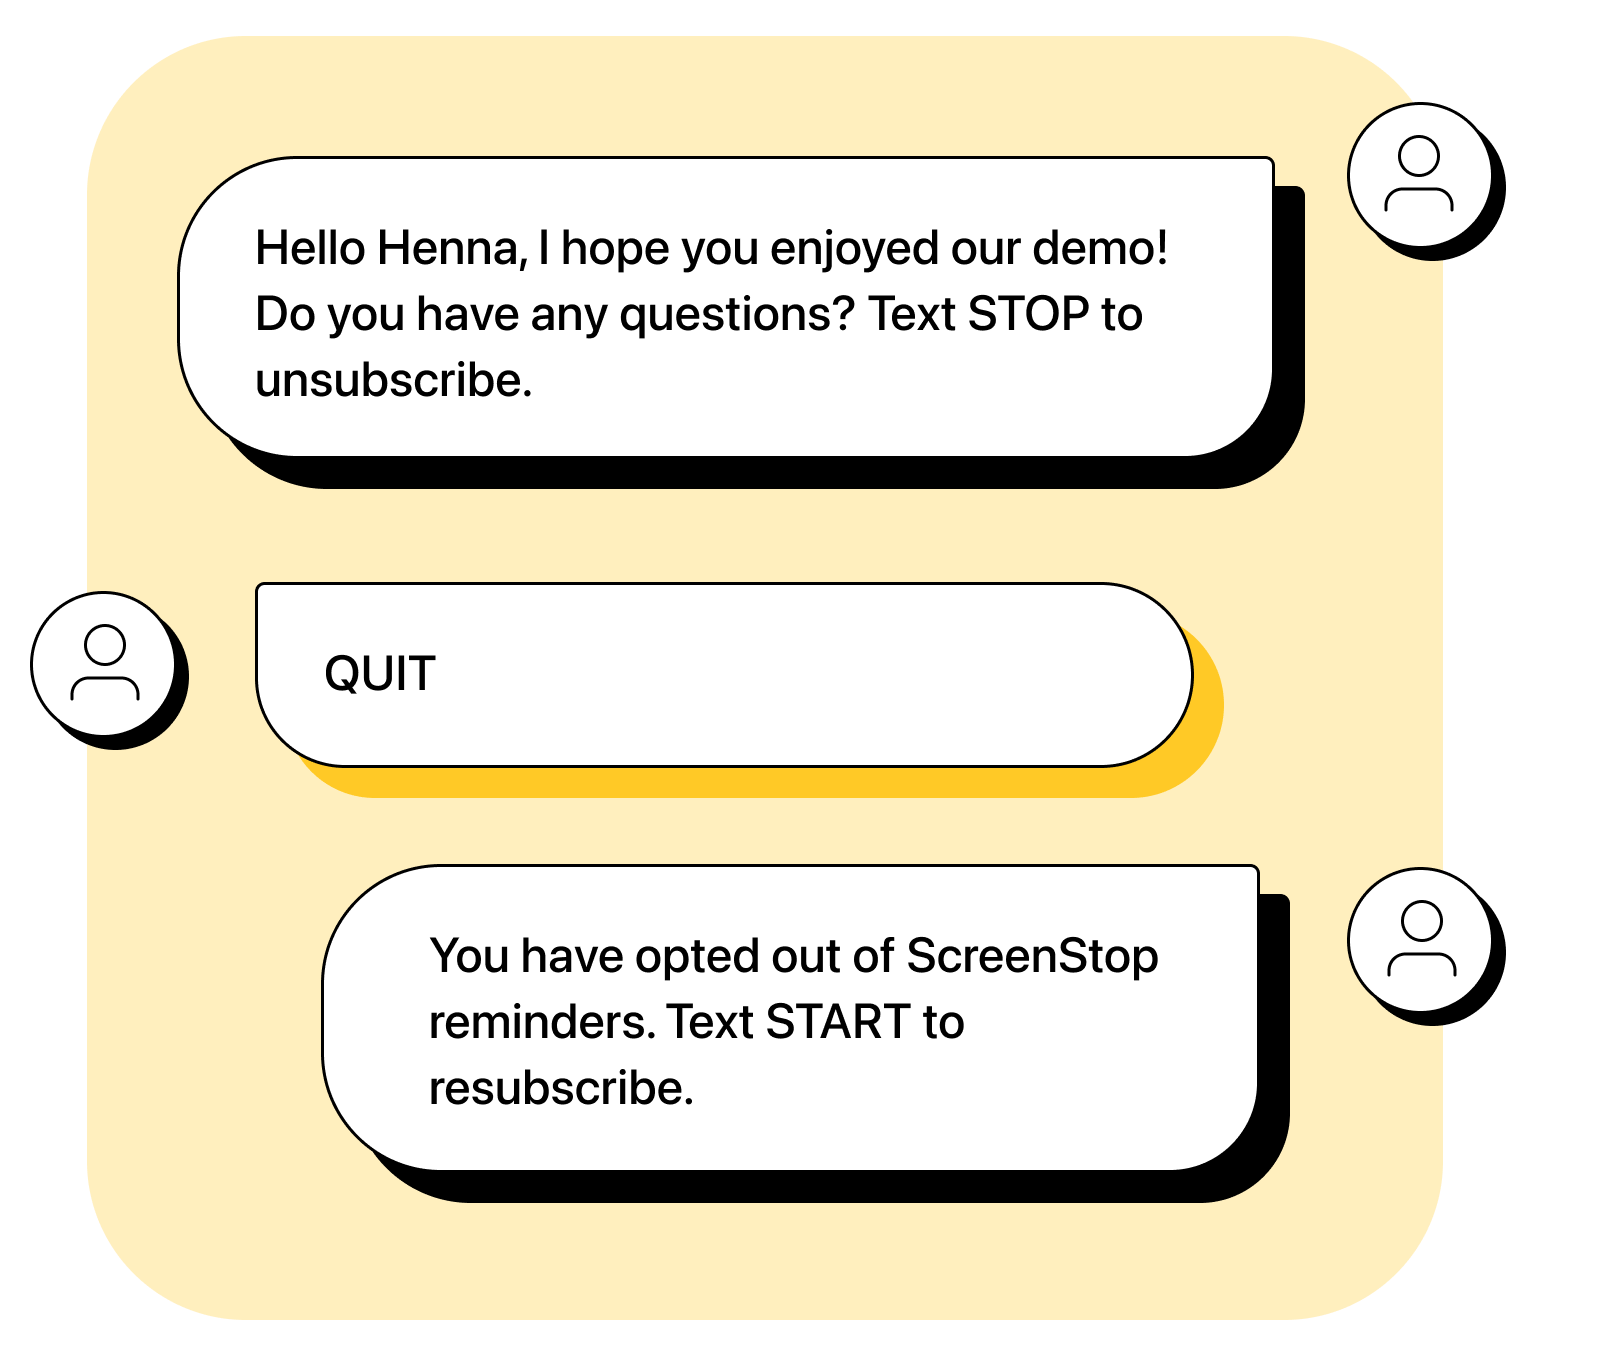 Business: Hello Henna, I hope you enjoyed our demo! Do you have any questions? Text STOP to unsubscribe. Henna: QUIT Business: You have opted out of ScreenStop reminders. Text START to resubscribe. 